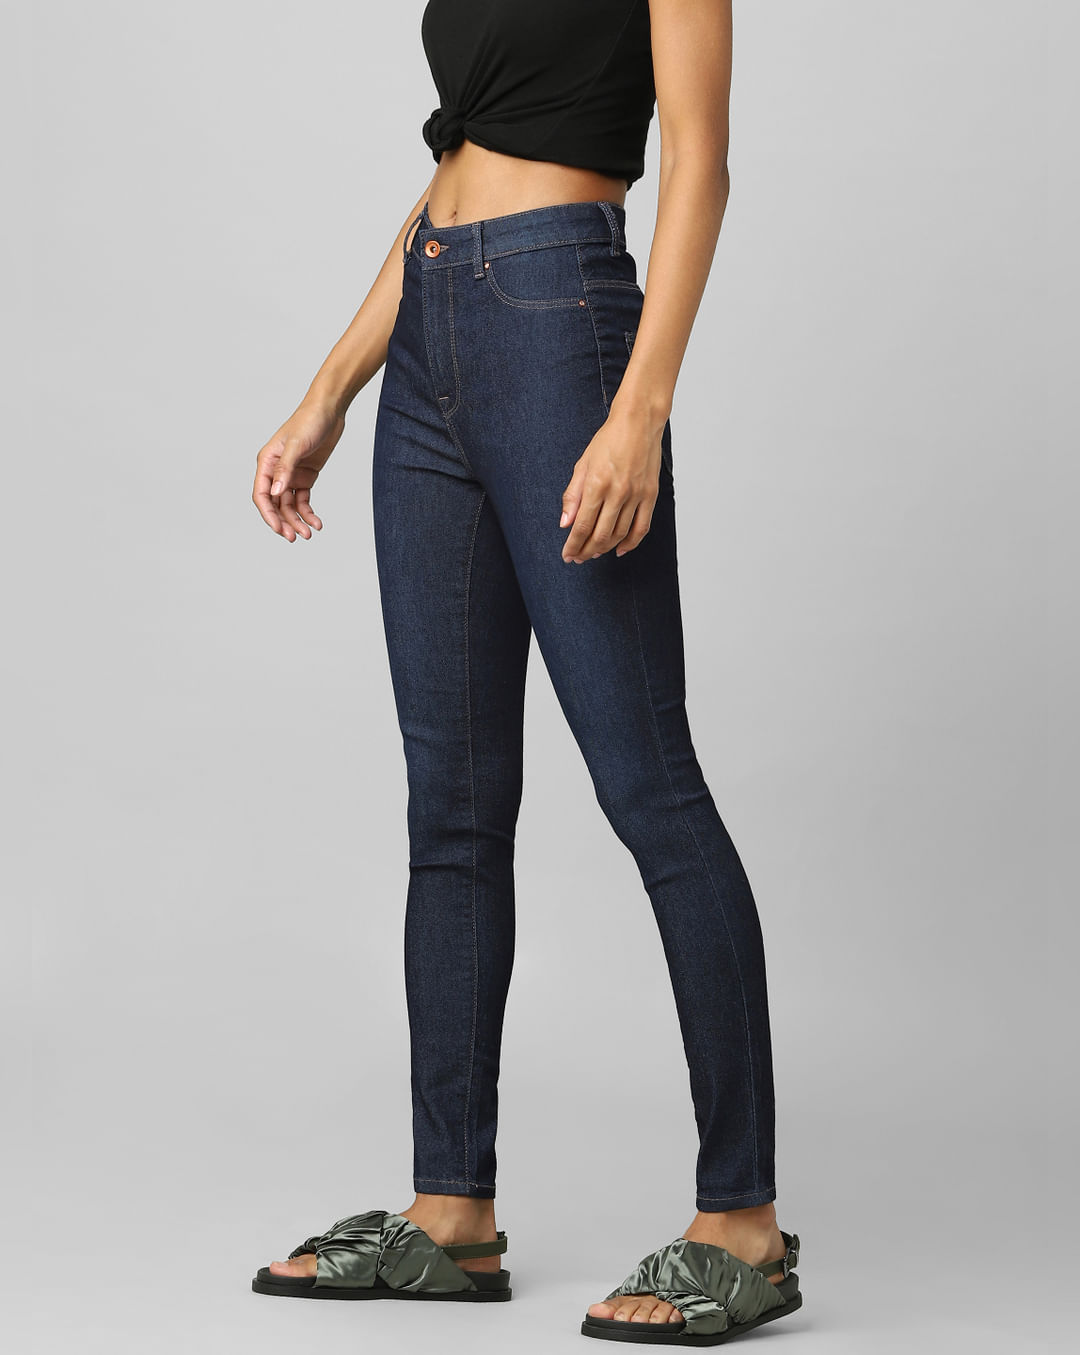  Calvin Klein Girls' Stretch Denim Jeans, Full-Length Skinny Fit  Pants with Pockets, Dark Rinse: Clothing, Shoes & Jewelry